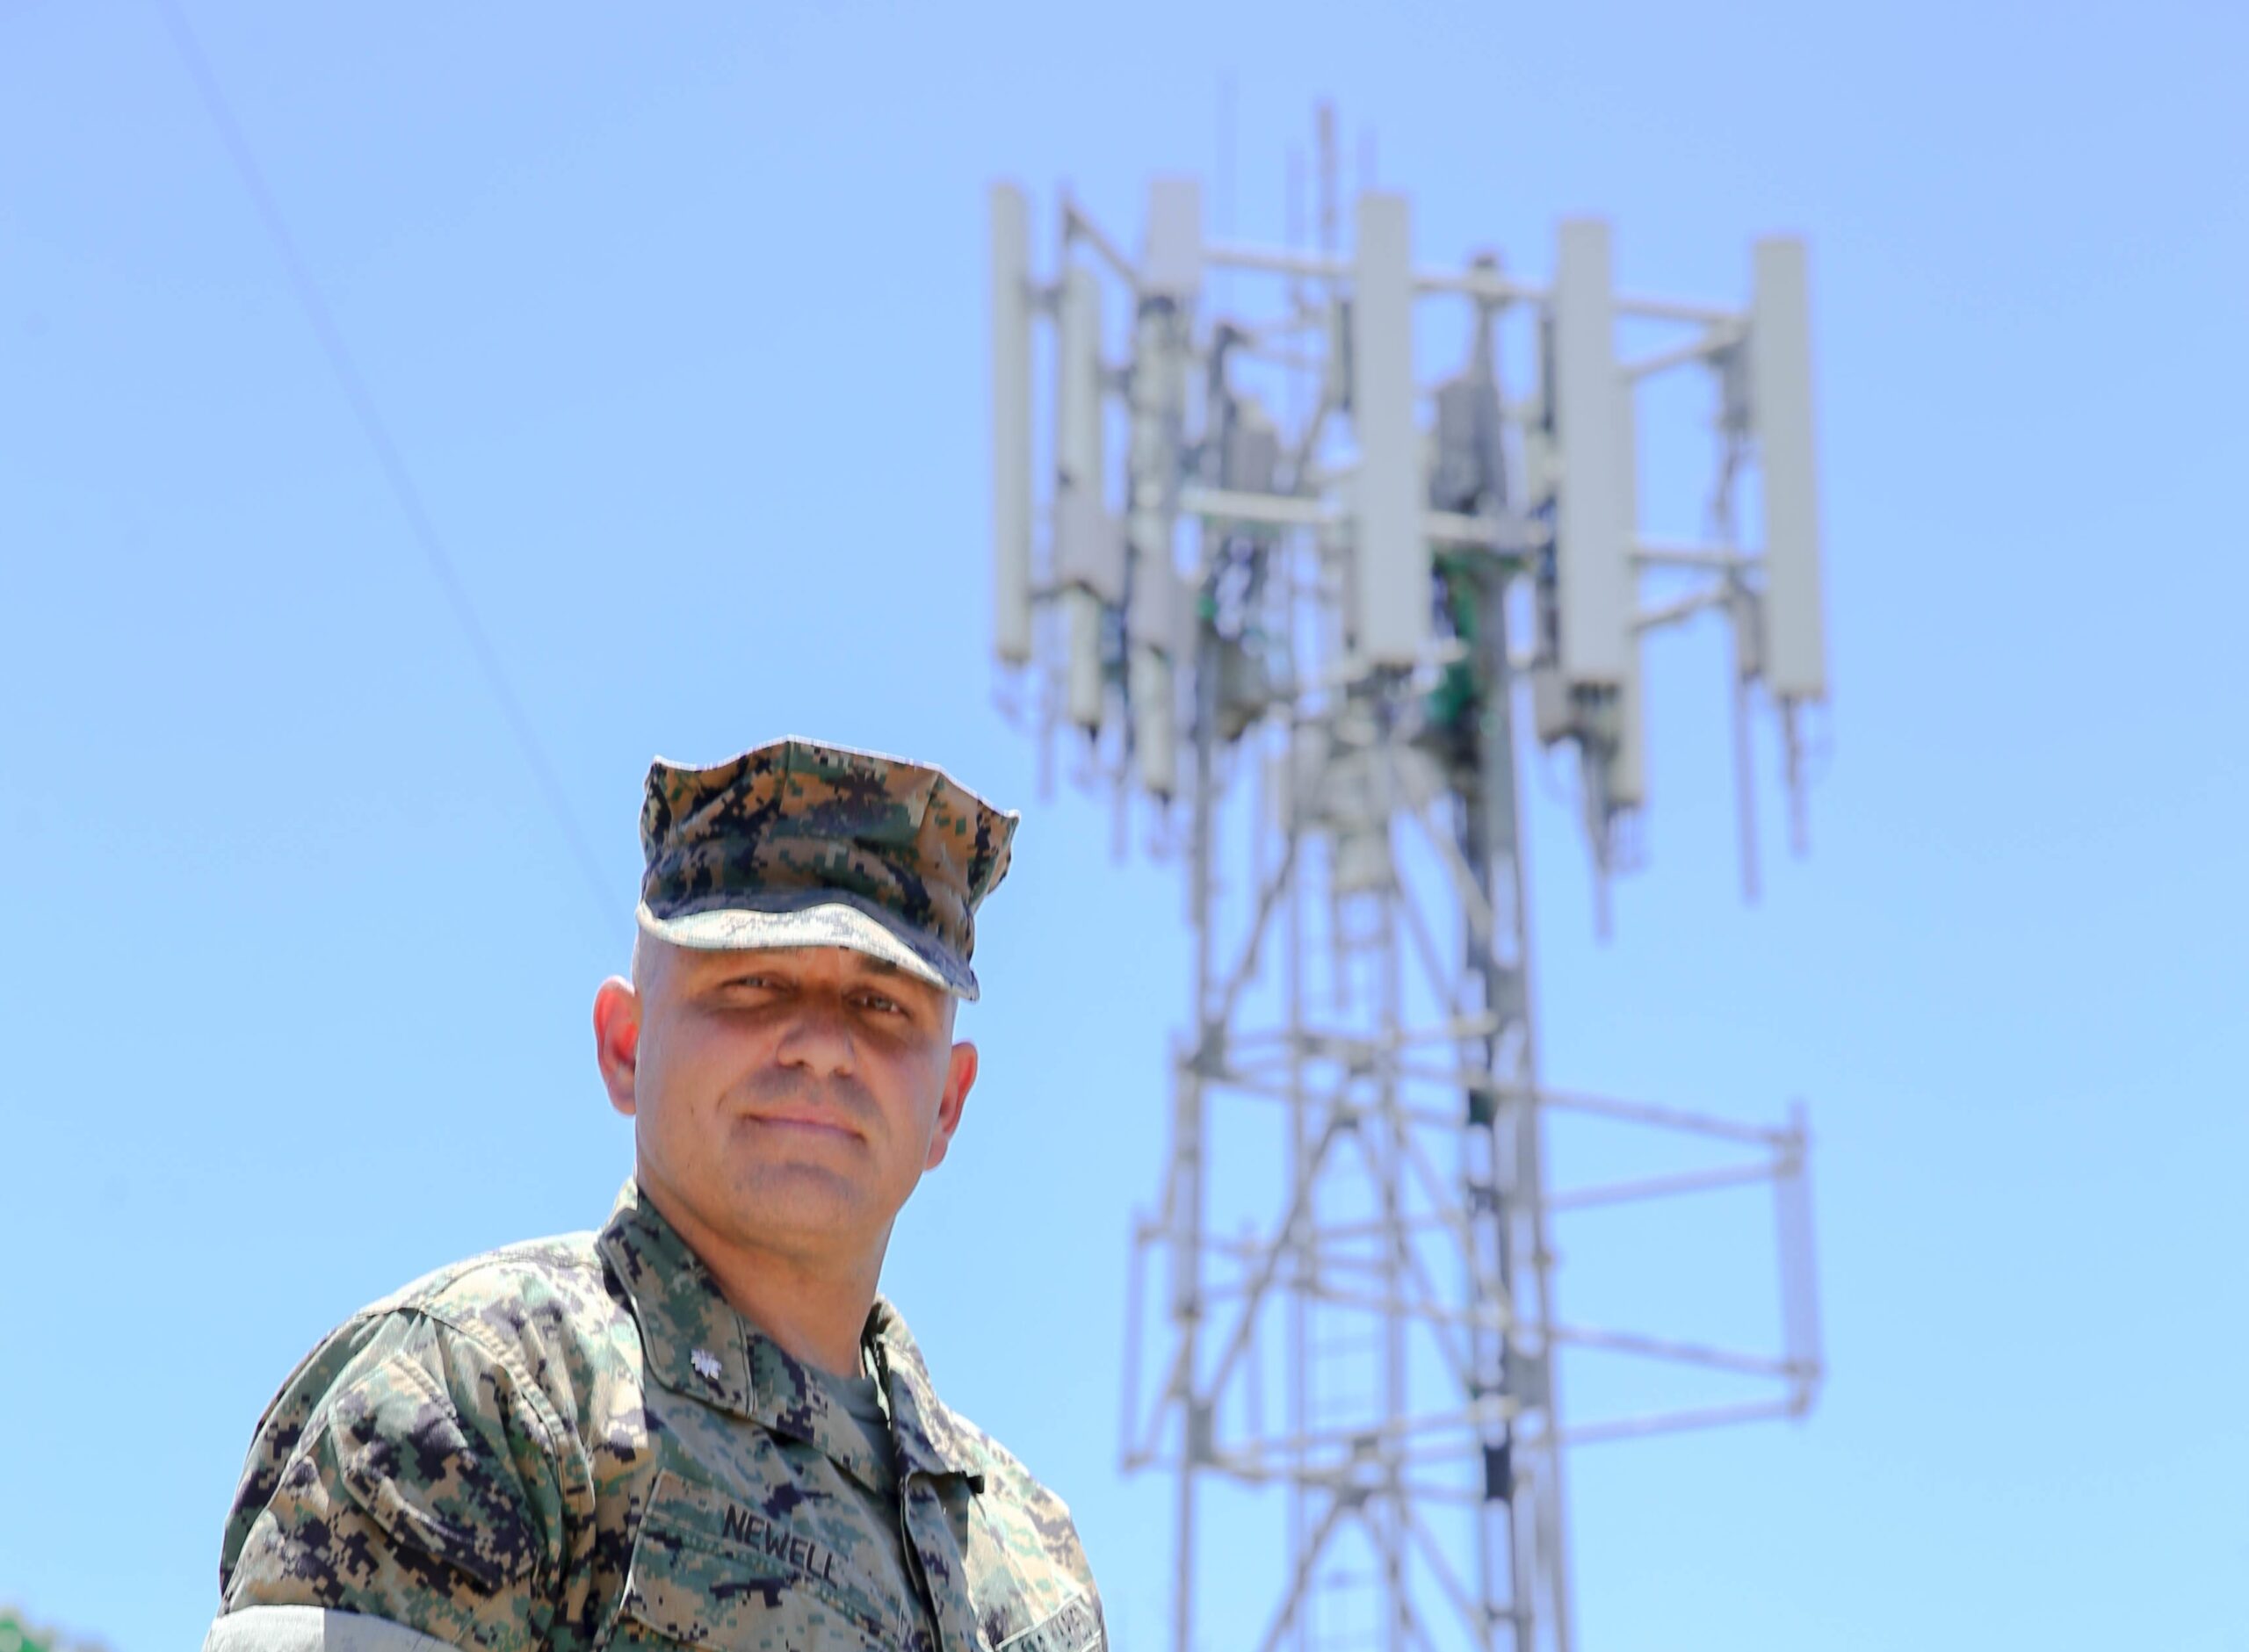 Bases’ 5G To Boost Data, Emergency Medicine & Combat